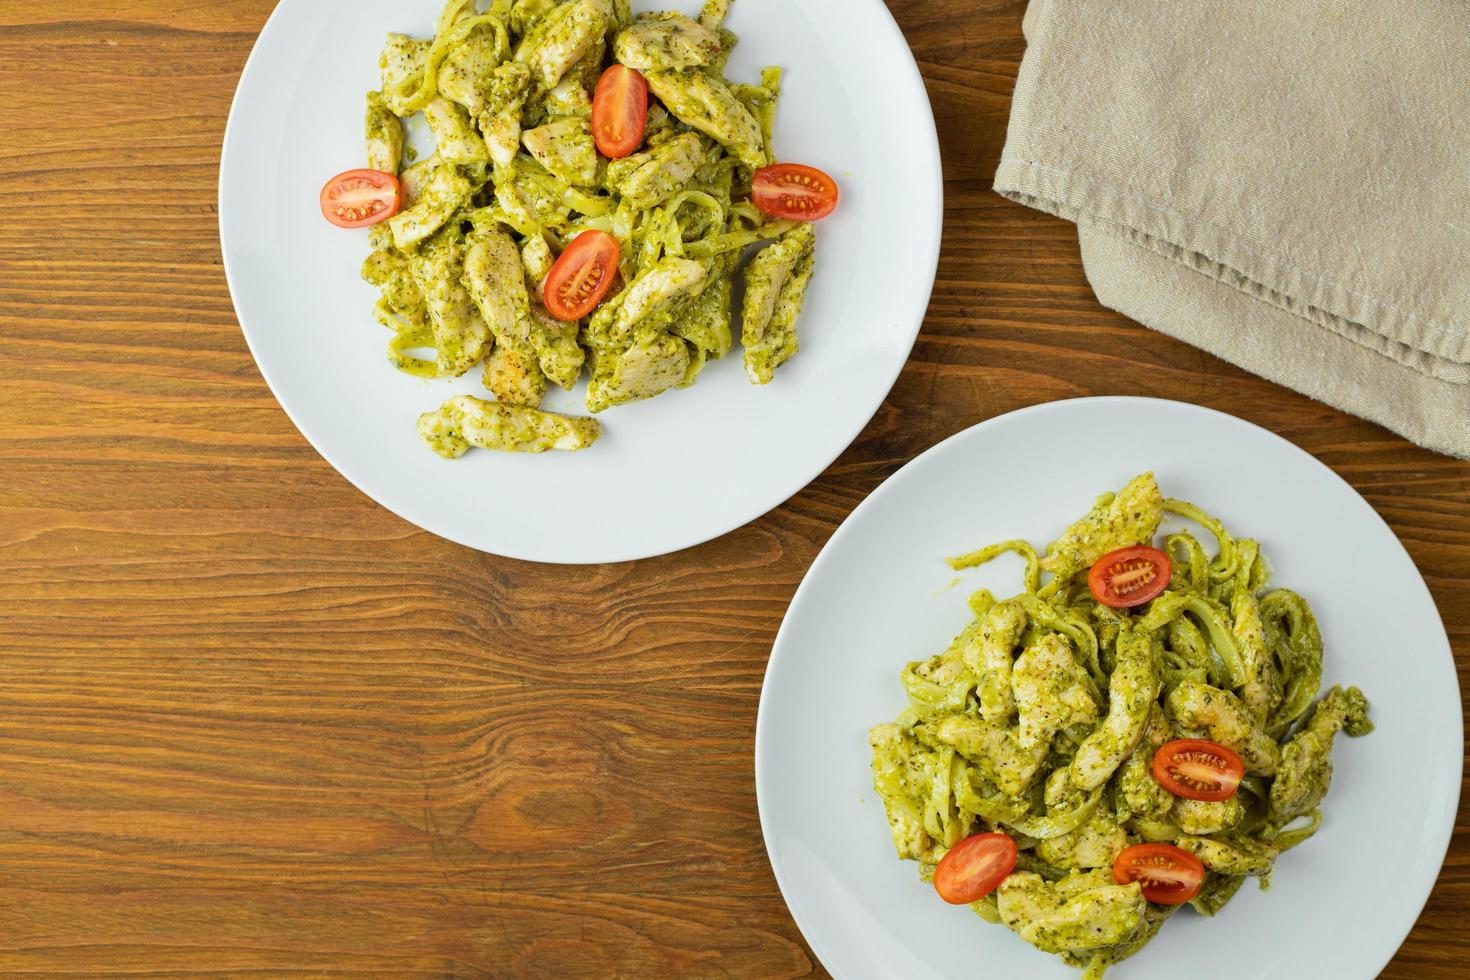 Pasta with pieces of chicken, basil pesto, and tomatoes. Delicious dinner. photo